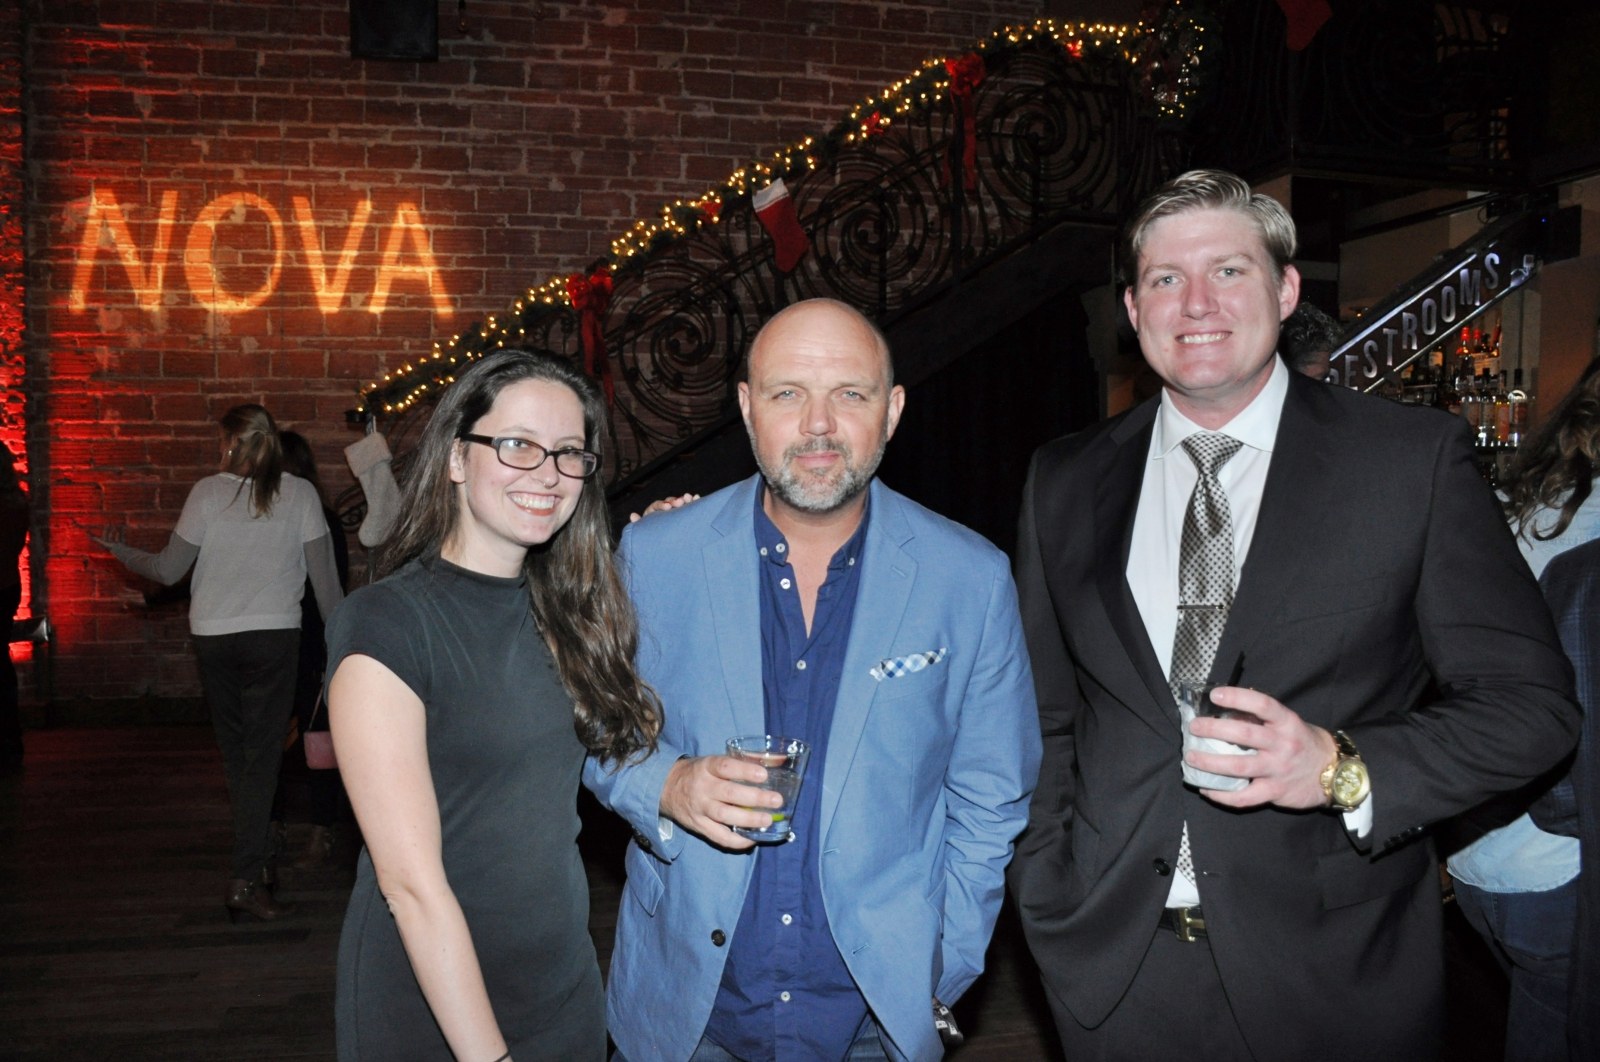 Friends and Family Gather for Nova Noel 10 at historic DTSP venue NOVA 535 for the Entrepreneur Social Club annual Holiday Party Nova Noel in downtown St. Pete